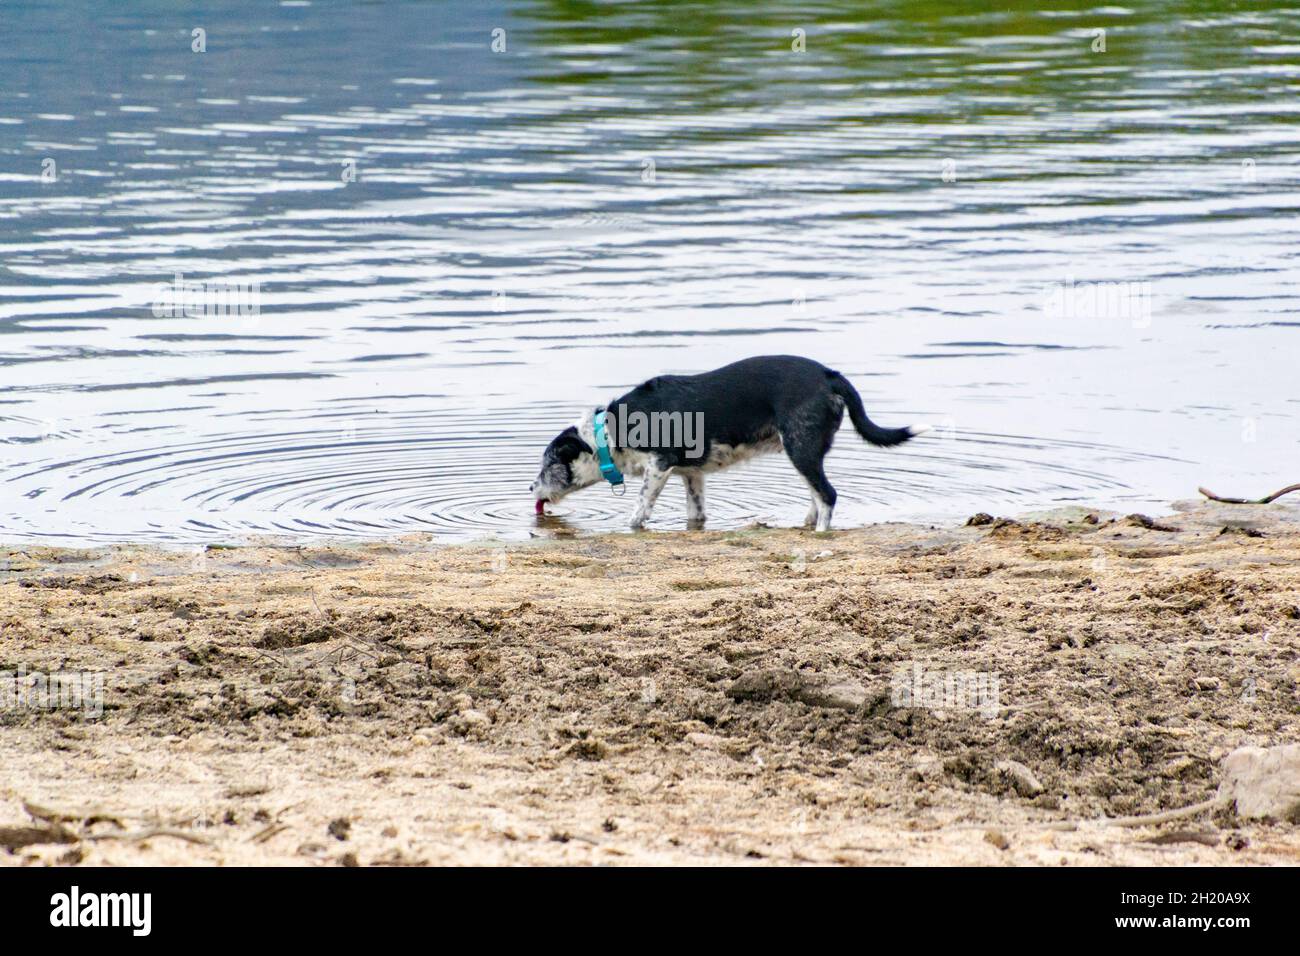 Dark dog drinking water from a reservoir in Segovia causing waves, in Castilla y León, in Spain. Europe. Horizontal photography. Stock Photo